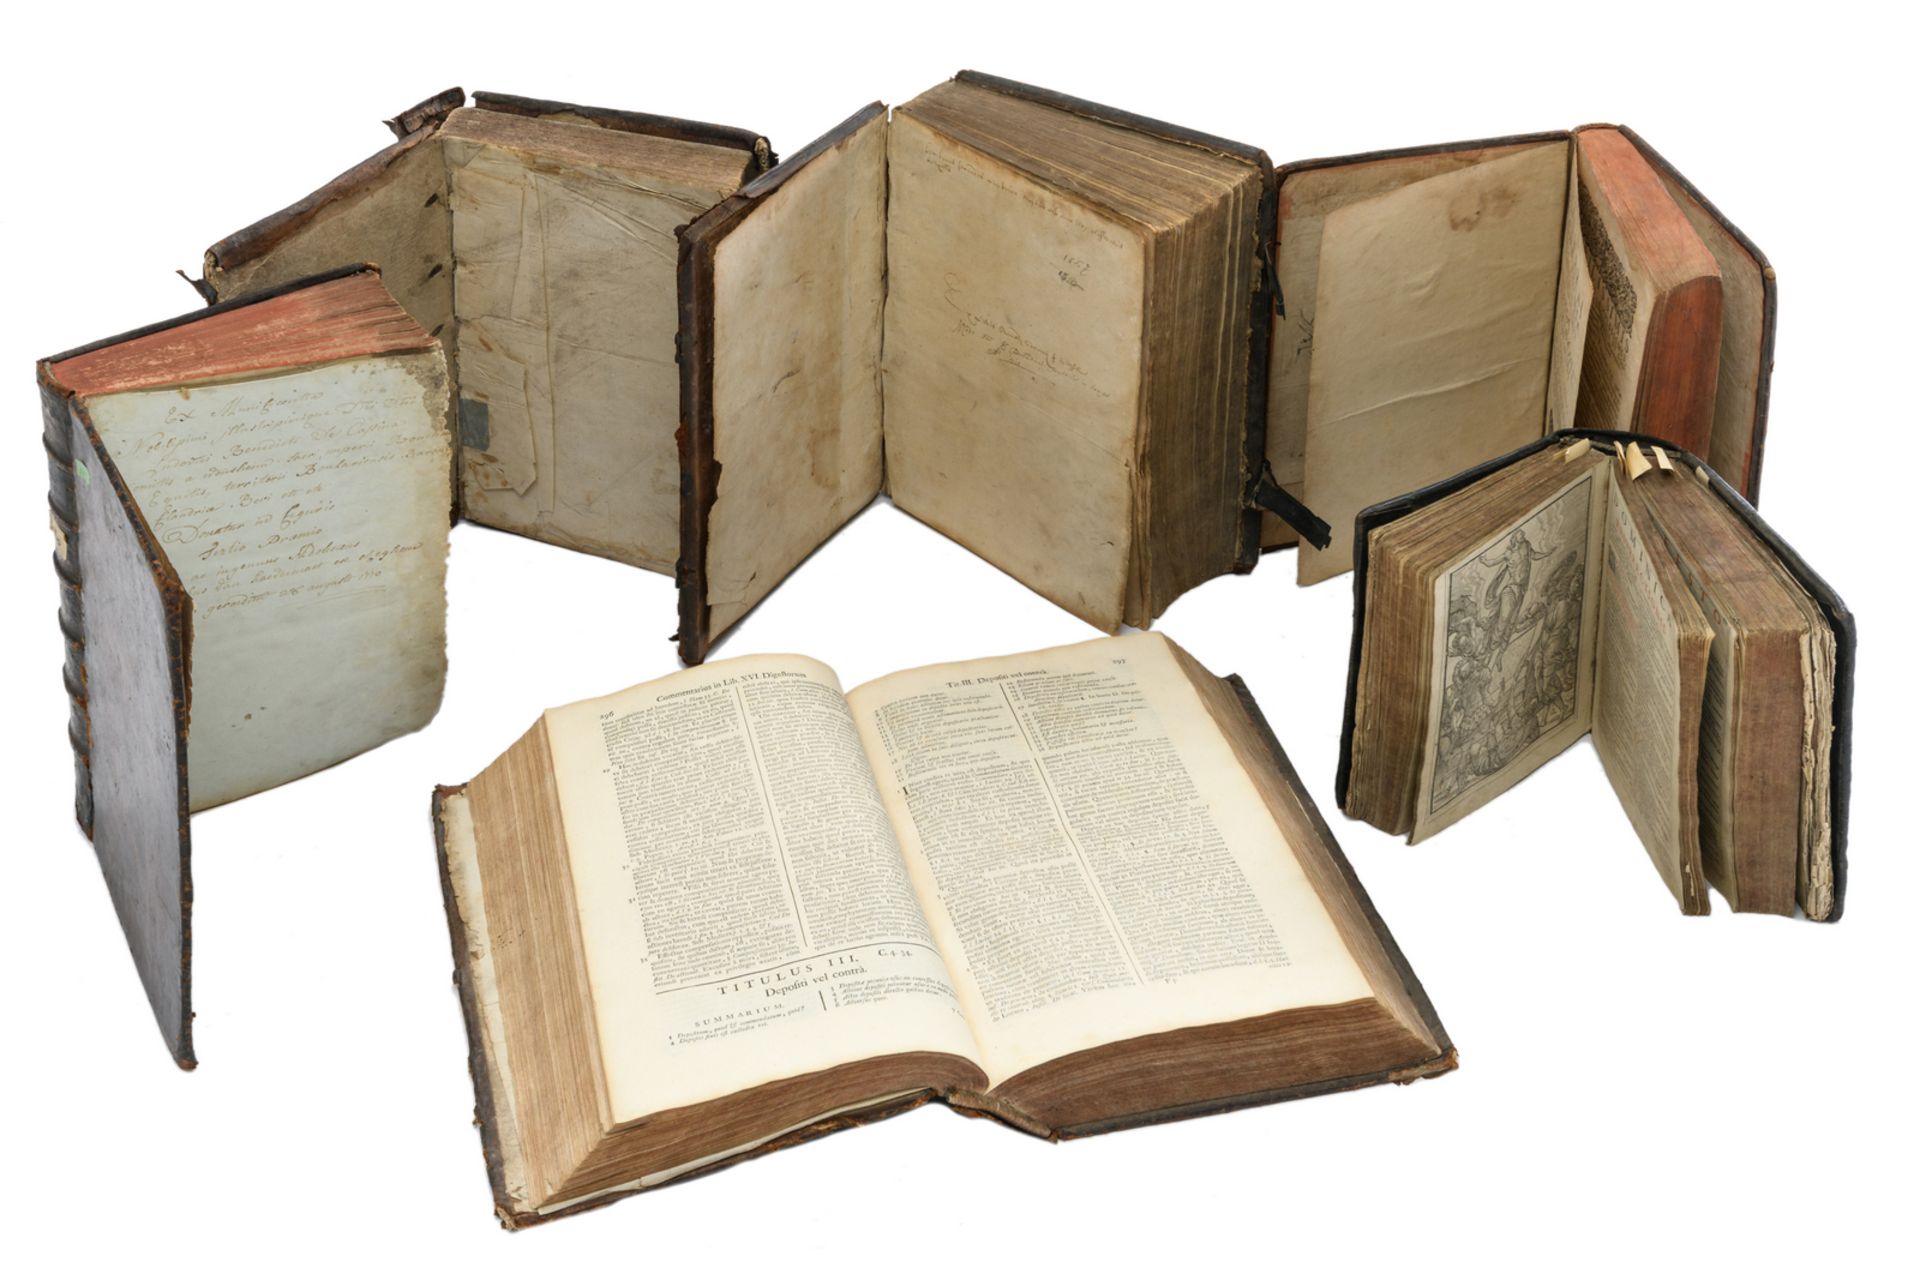 Six 17th and 18thC books (religion, law, etc.)